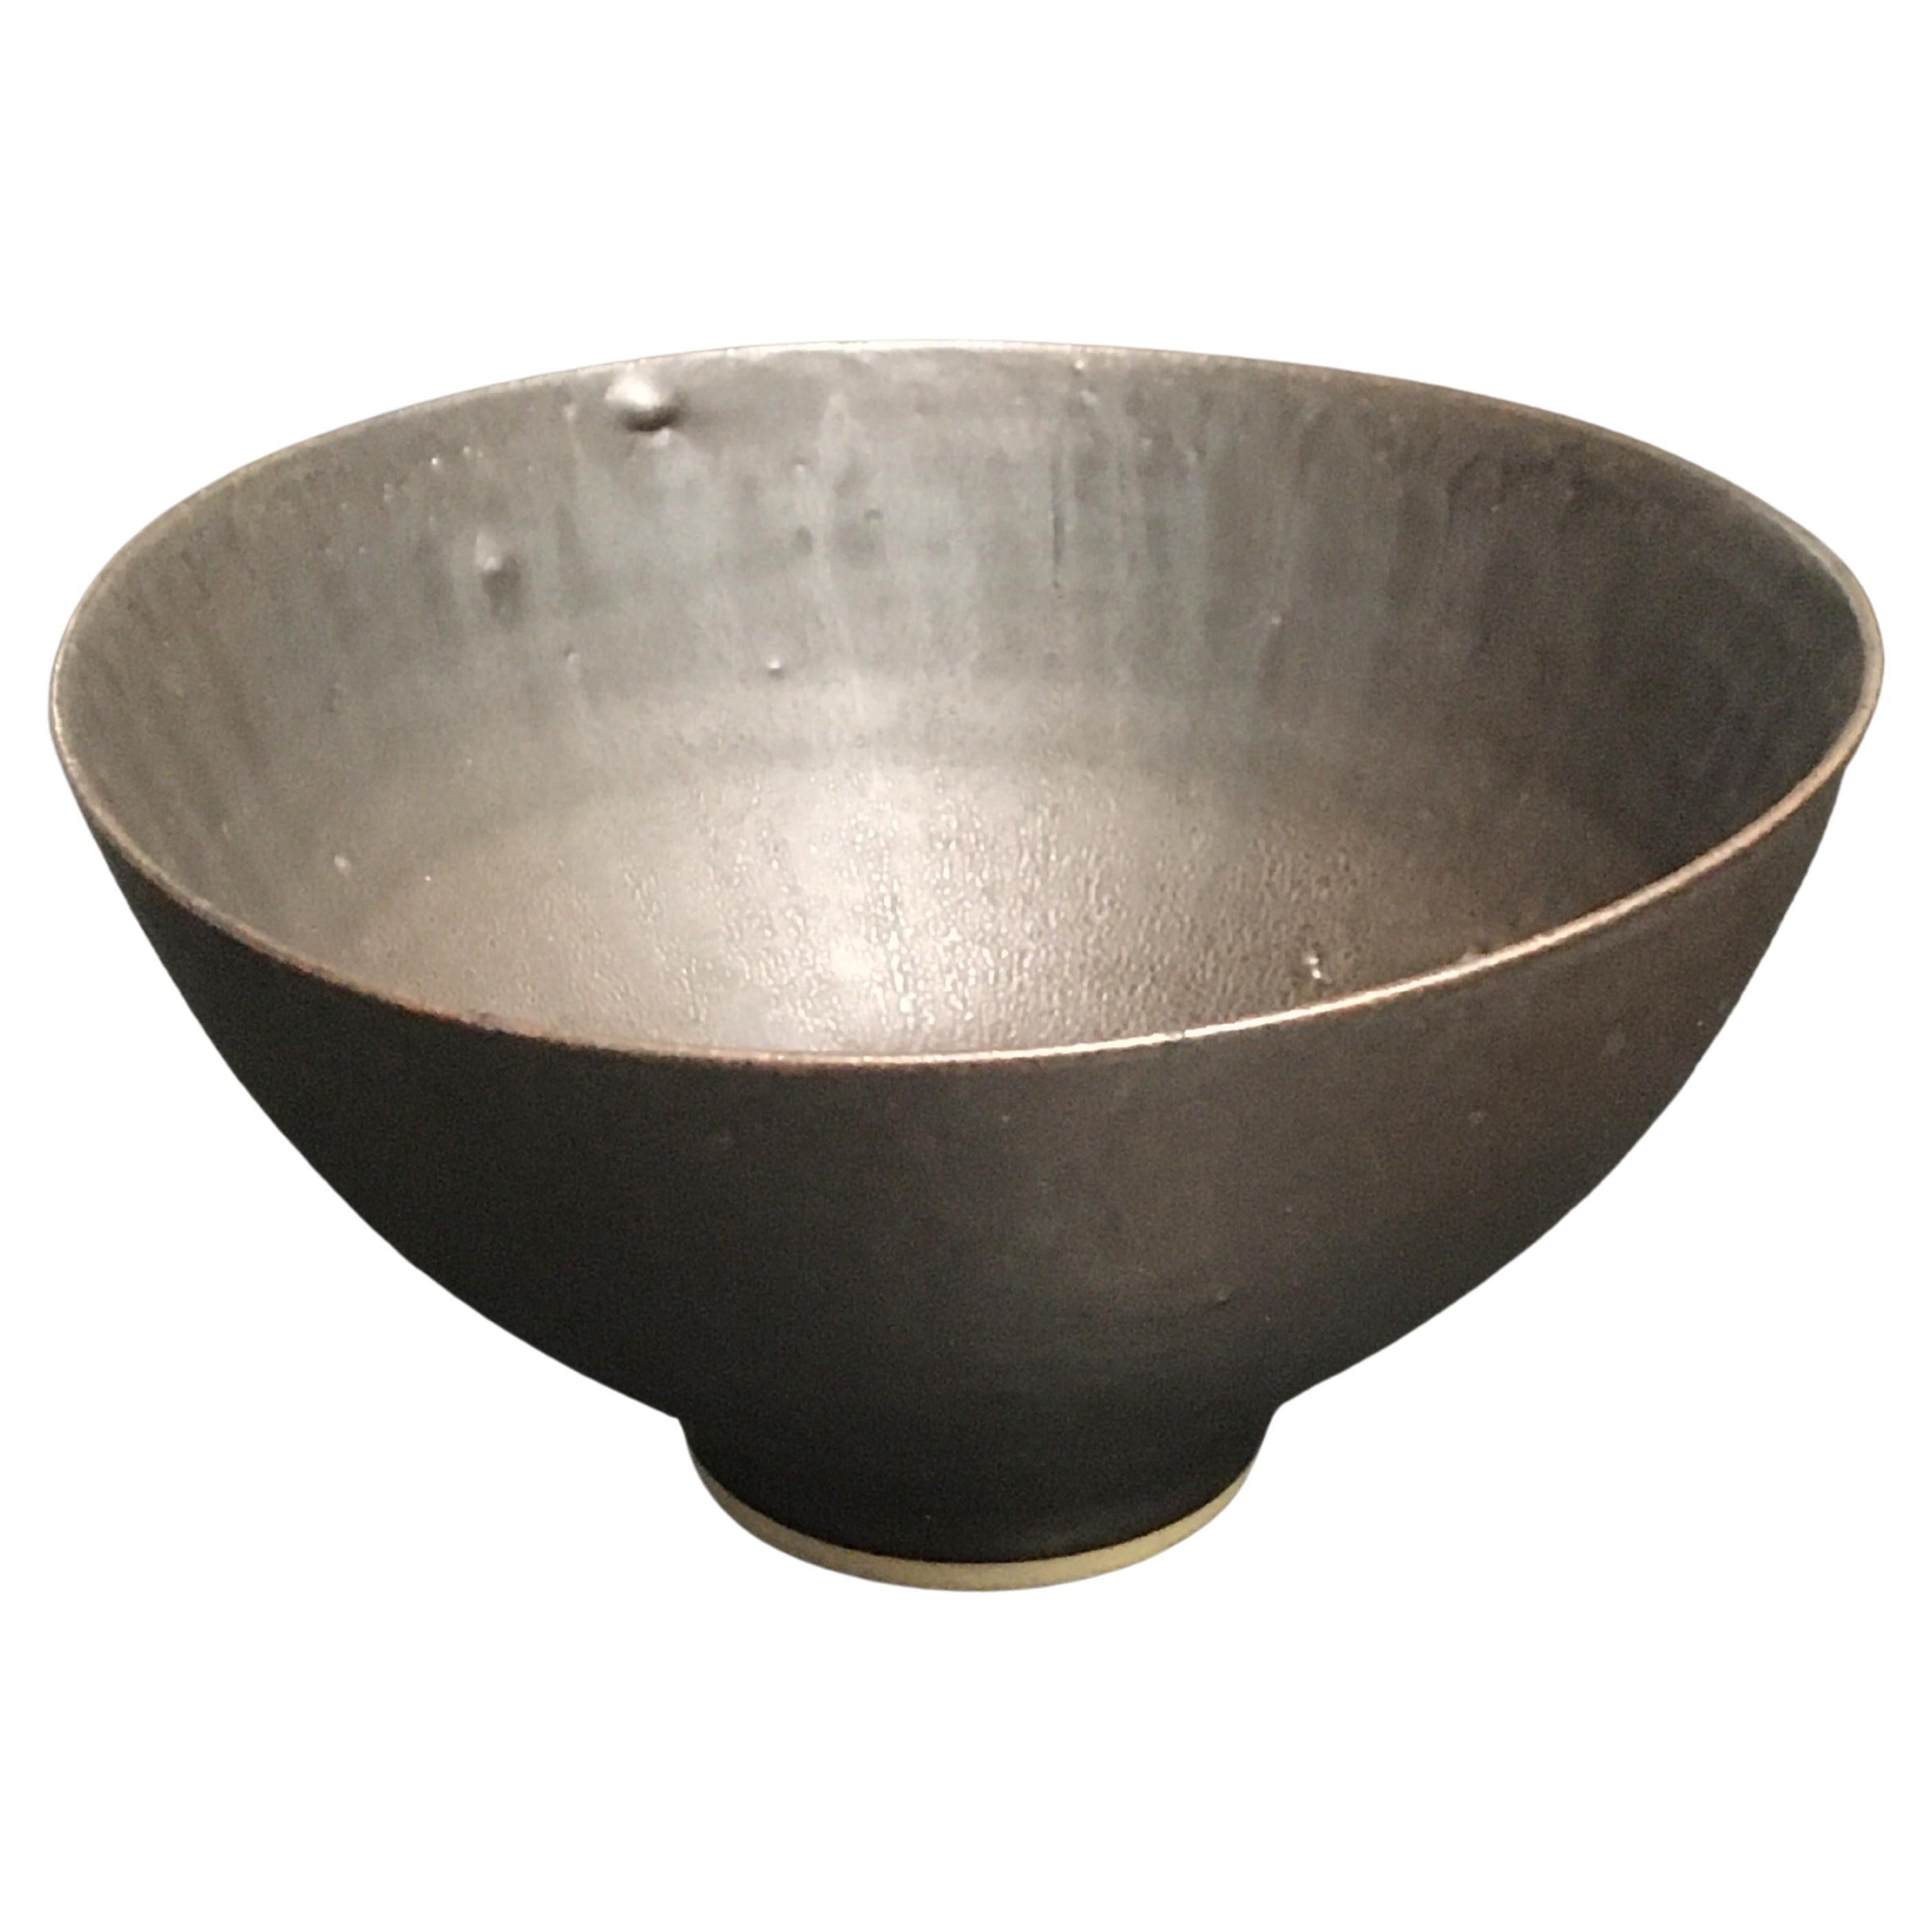 This is a great example of a Lucie Rie iconic hand-thrown, footed bowl with manganese glaze.

It is thinly potted and slightly pulled into an ovoid shape with an undulating rim.

The running glaze is subtle whilst adding an individual element to the